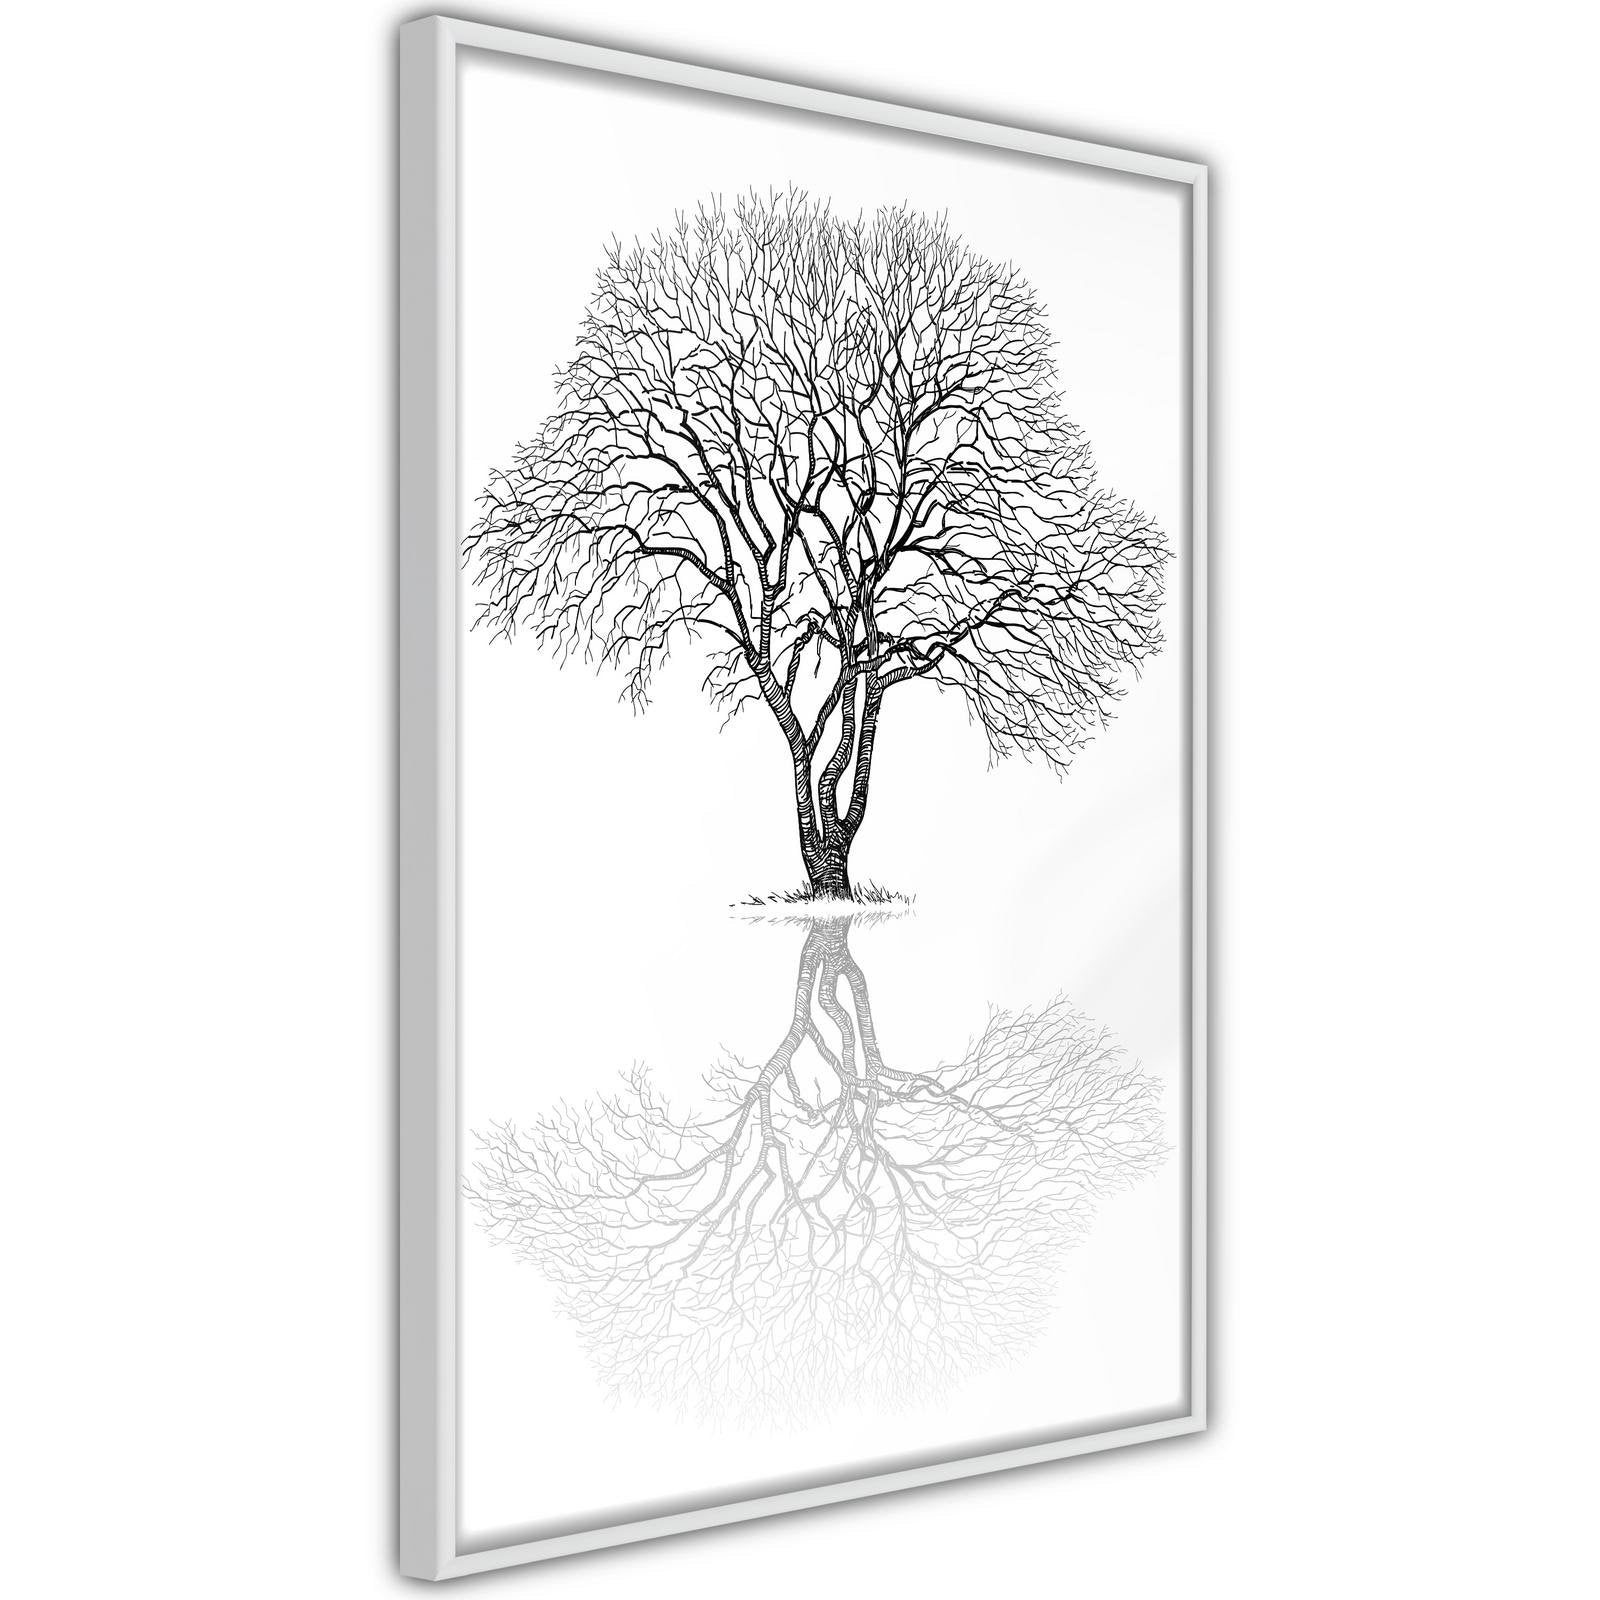 Inramad Poster / Tavla - Roots or Treetop?-Poster Inramad-Artgeist-peaceofhome.se